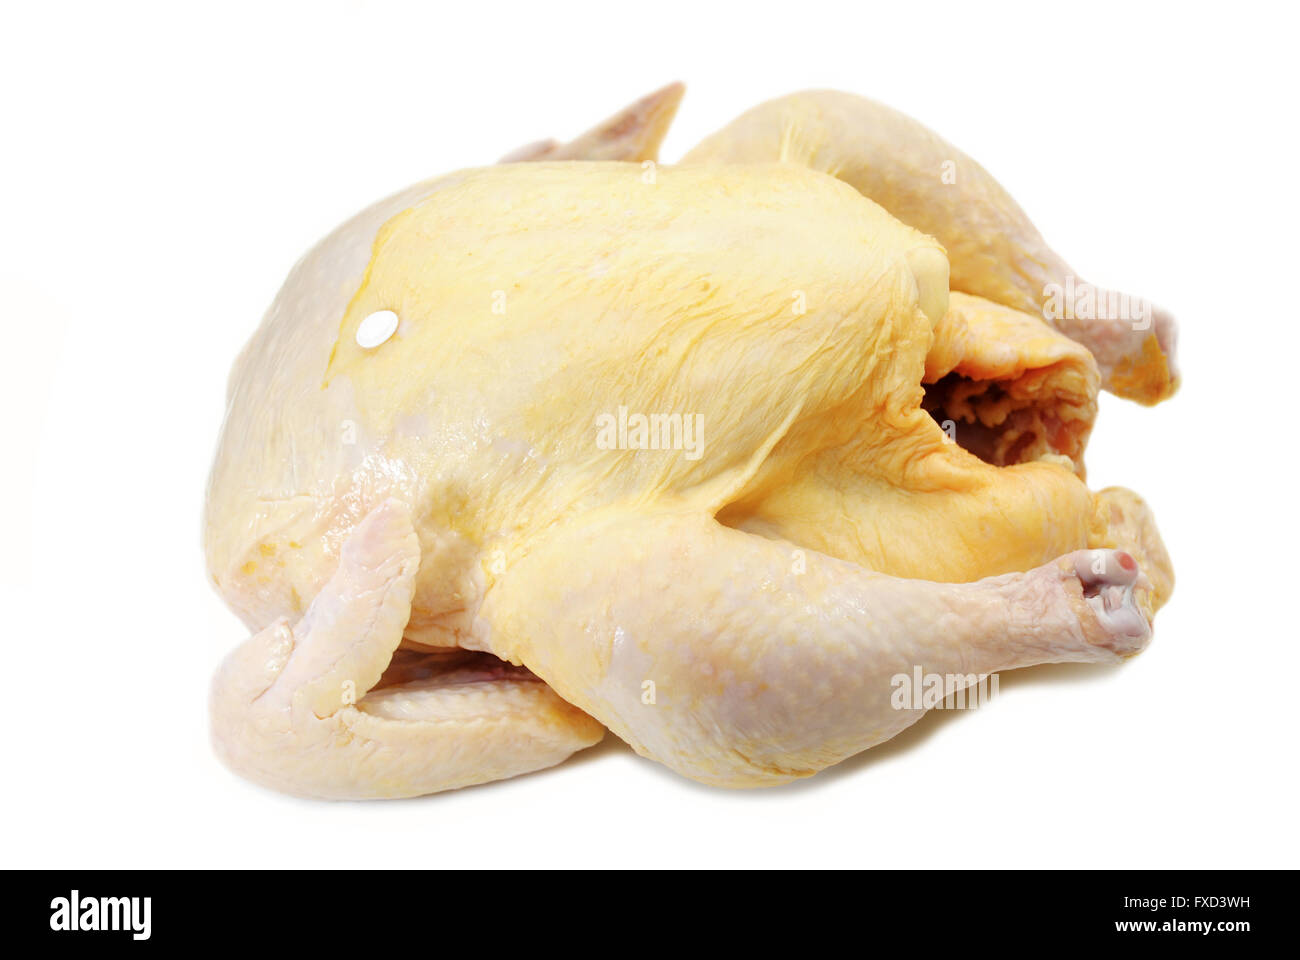 Whole Raw Turkey or Chicken Isolated on White Stock Photo